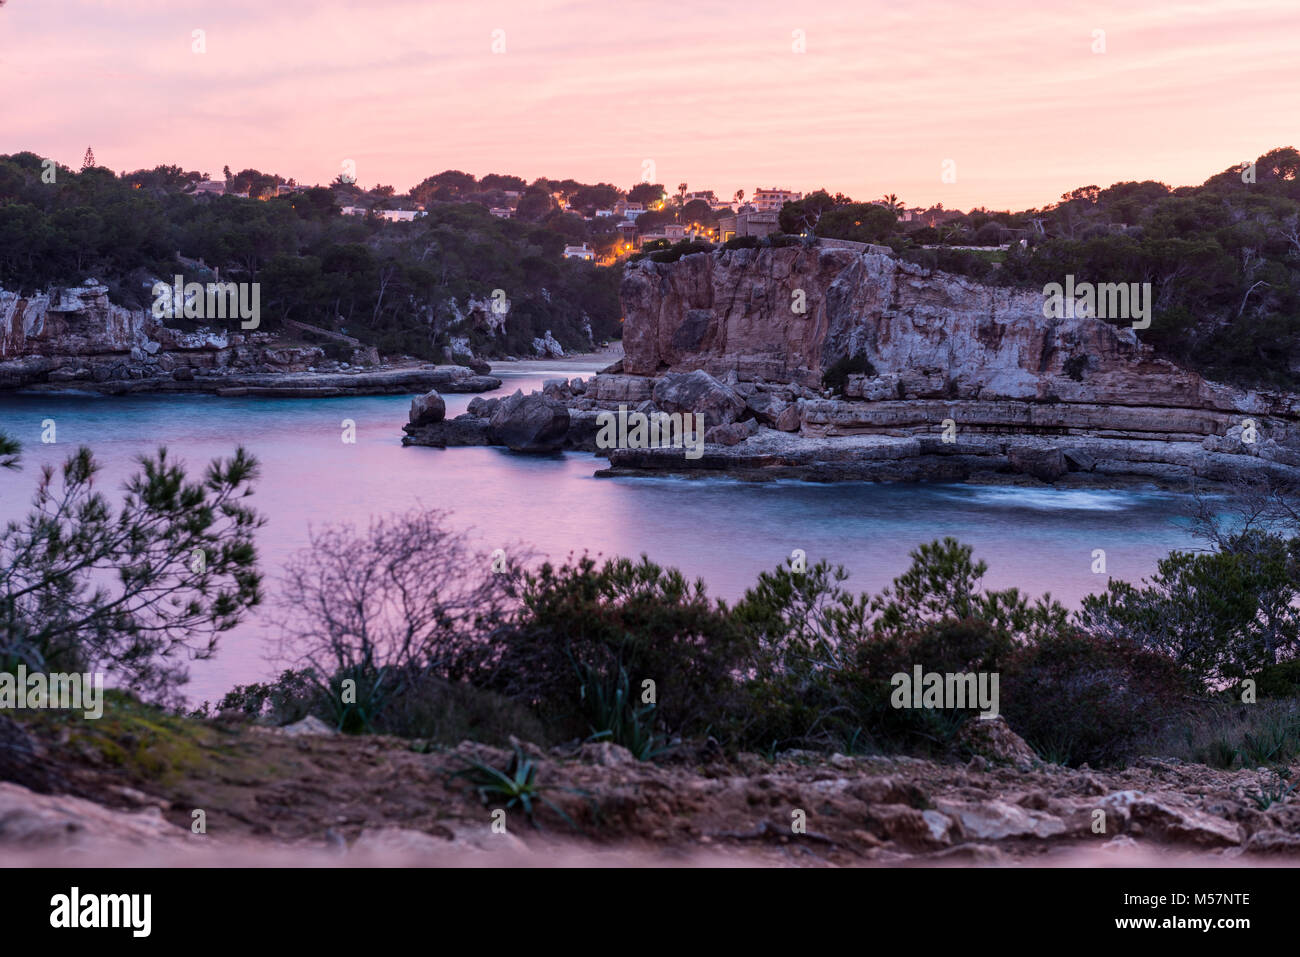 View of a colorful sunset over Cala Llombards in Mallorca, Spain. Stock Photo